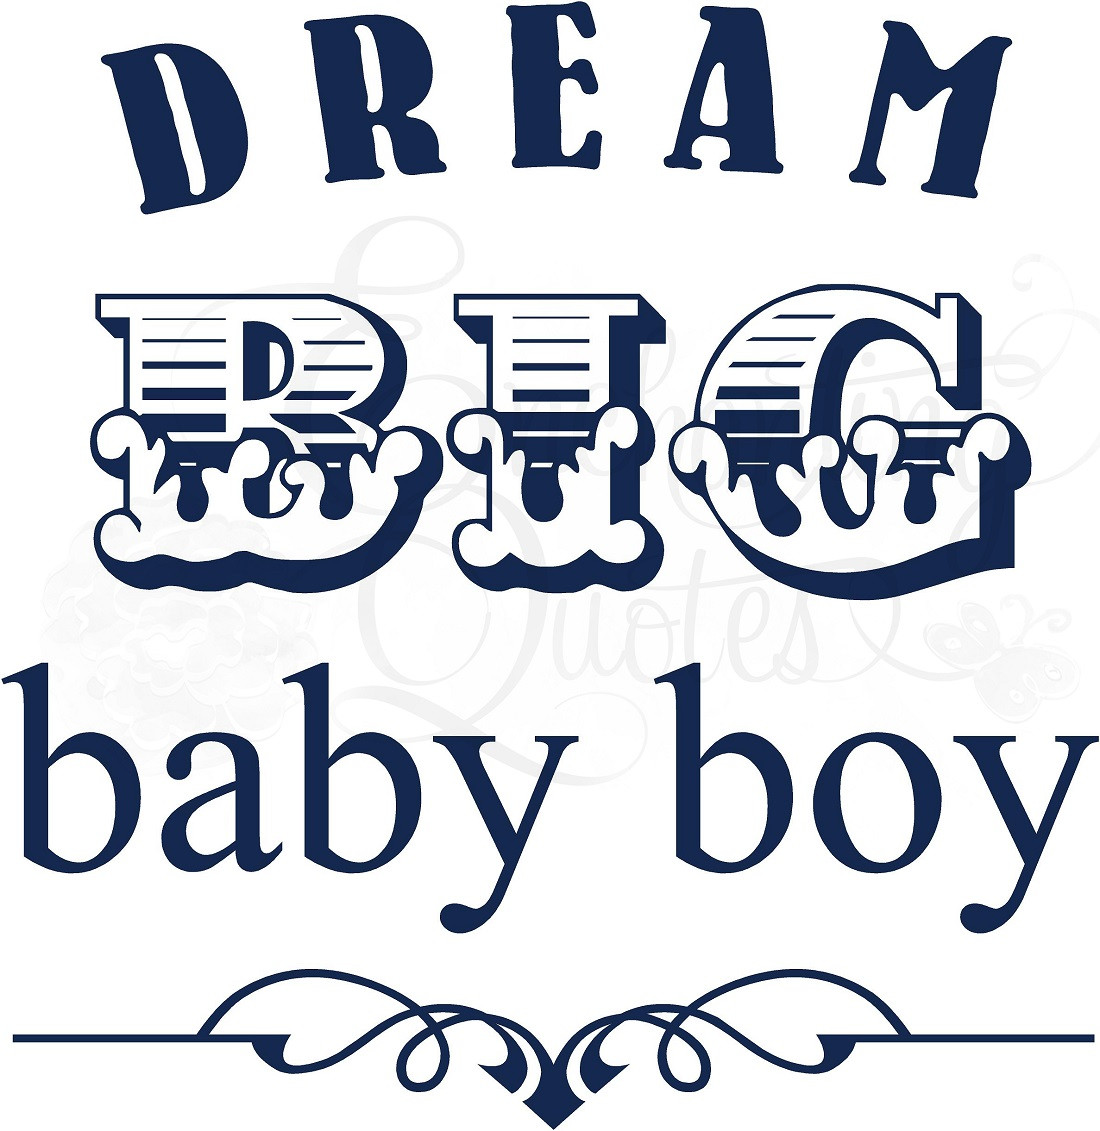 Baby Boy Quotes
 Nursery Wall Quotes Baby Quotes for Boys